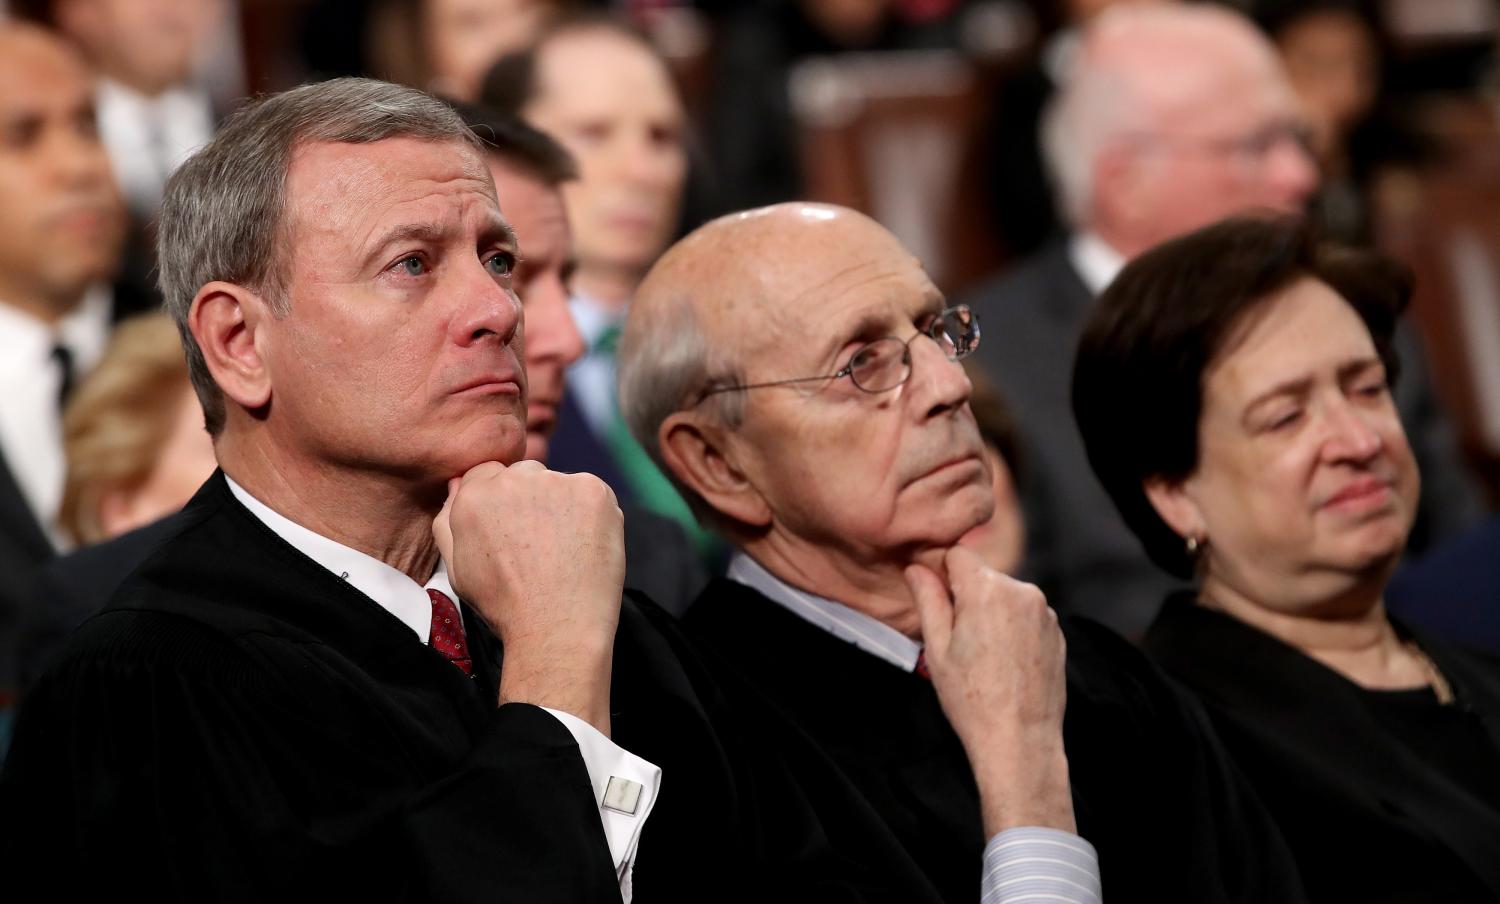 U.S. Supreme Court Chief Justice John G. Roberts  and Associate Justices Stephen Breyer and Elena Kagan listen during U.S. President Donald Trump's first State of the Union address to a joint session of Congress on Capitol Hill in Washington, U.S., January 30, 2018. REUTERS/Win McNamee/Pool - HP1EE1V0CVM4D